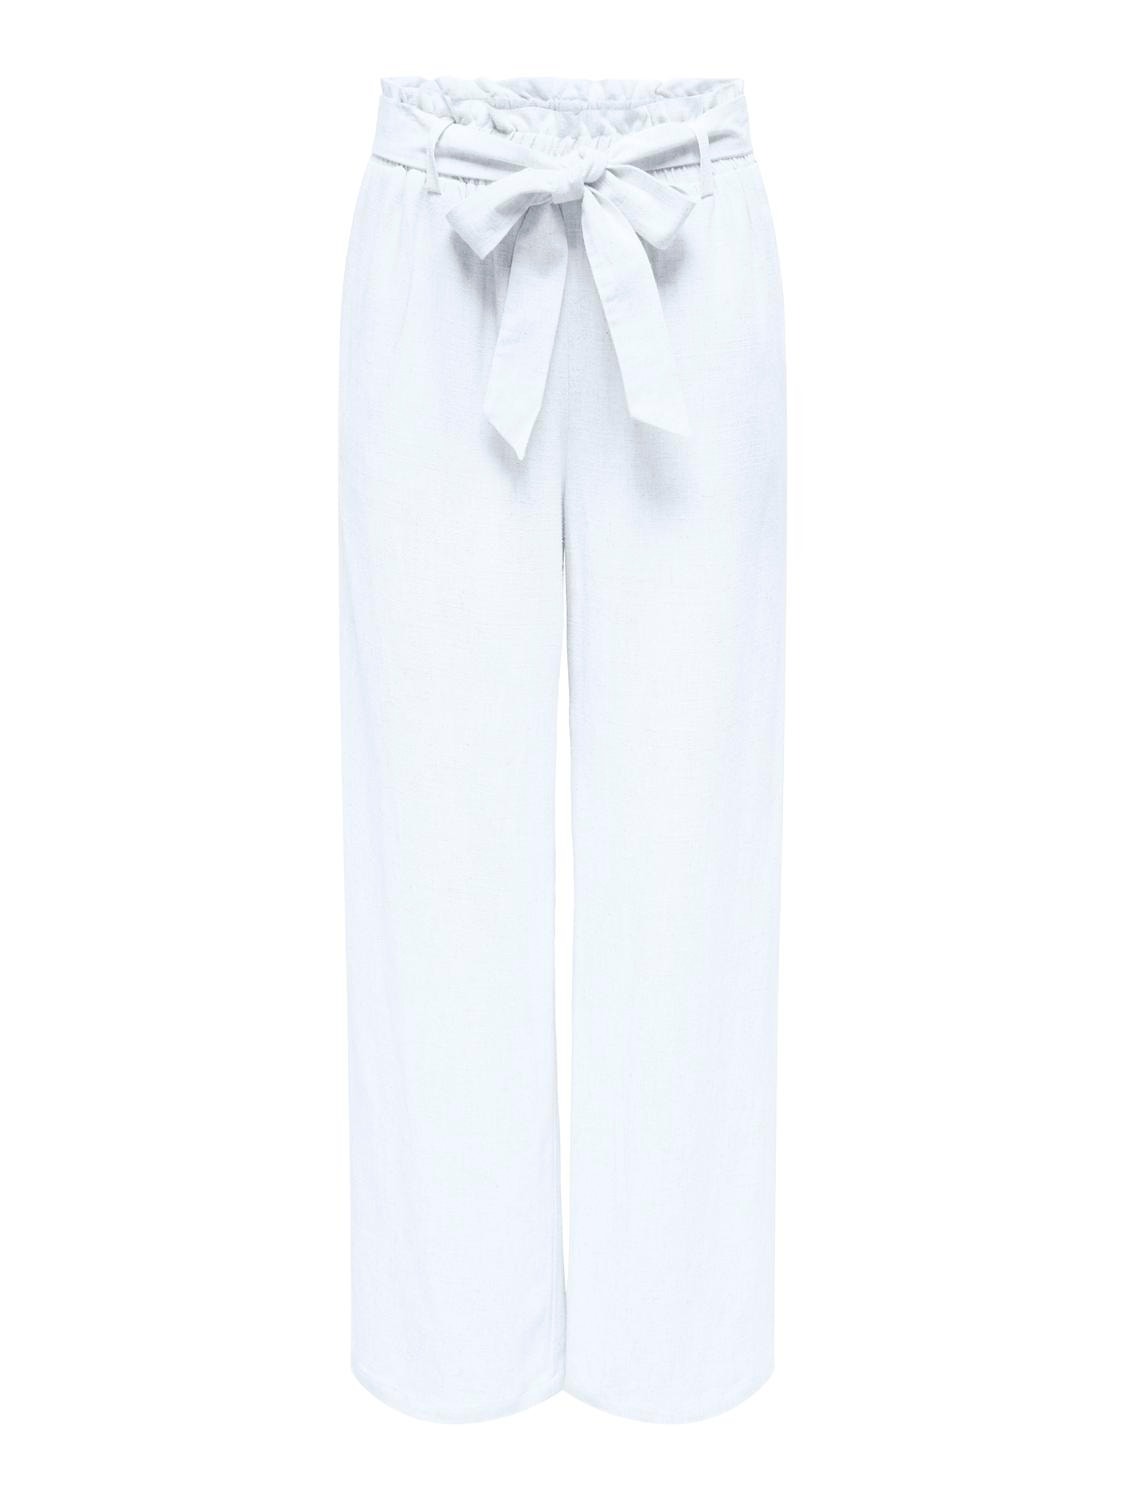 ONLY Straight Fit High waist Trousers -Bright White - 15322259